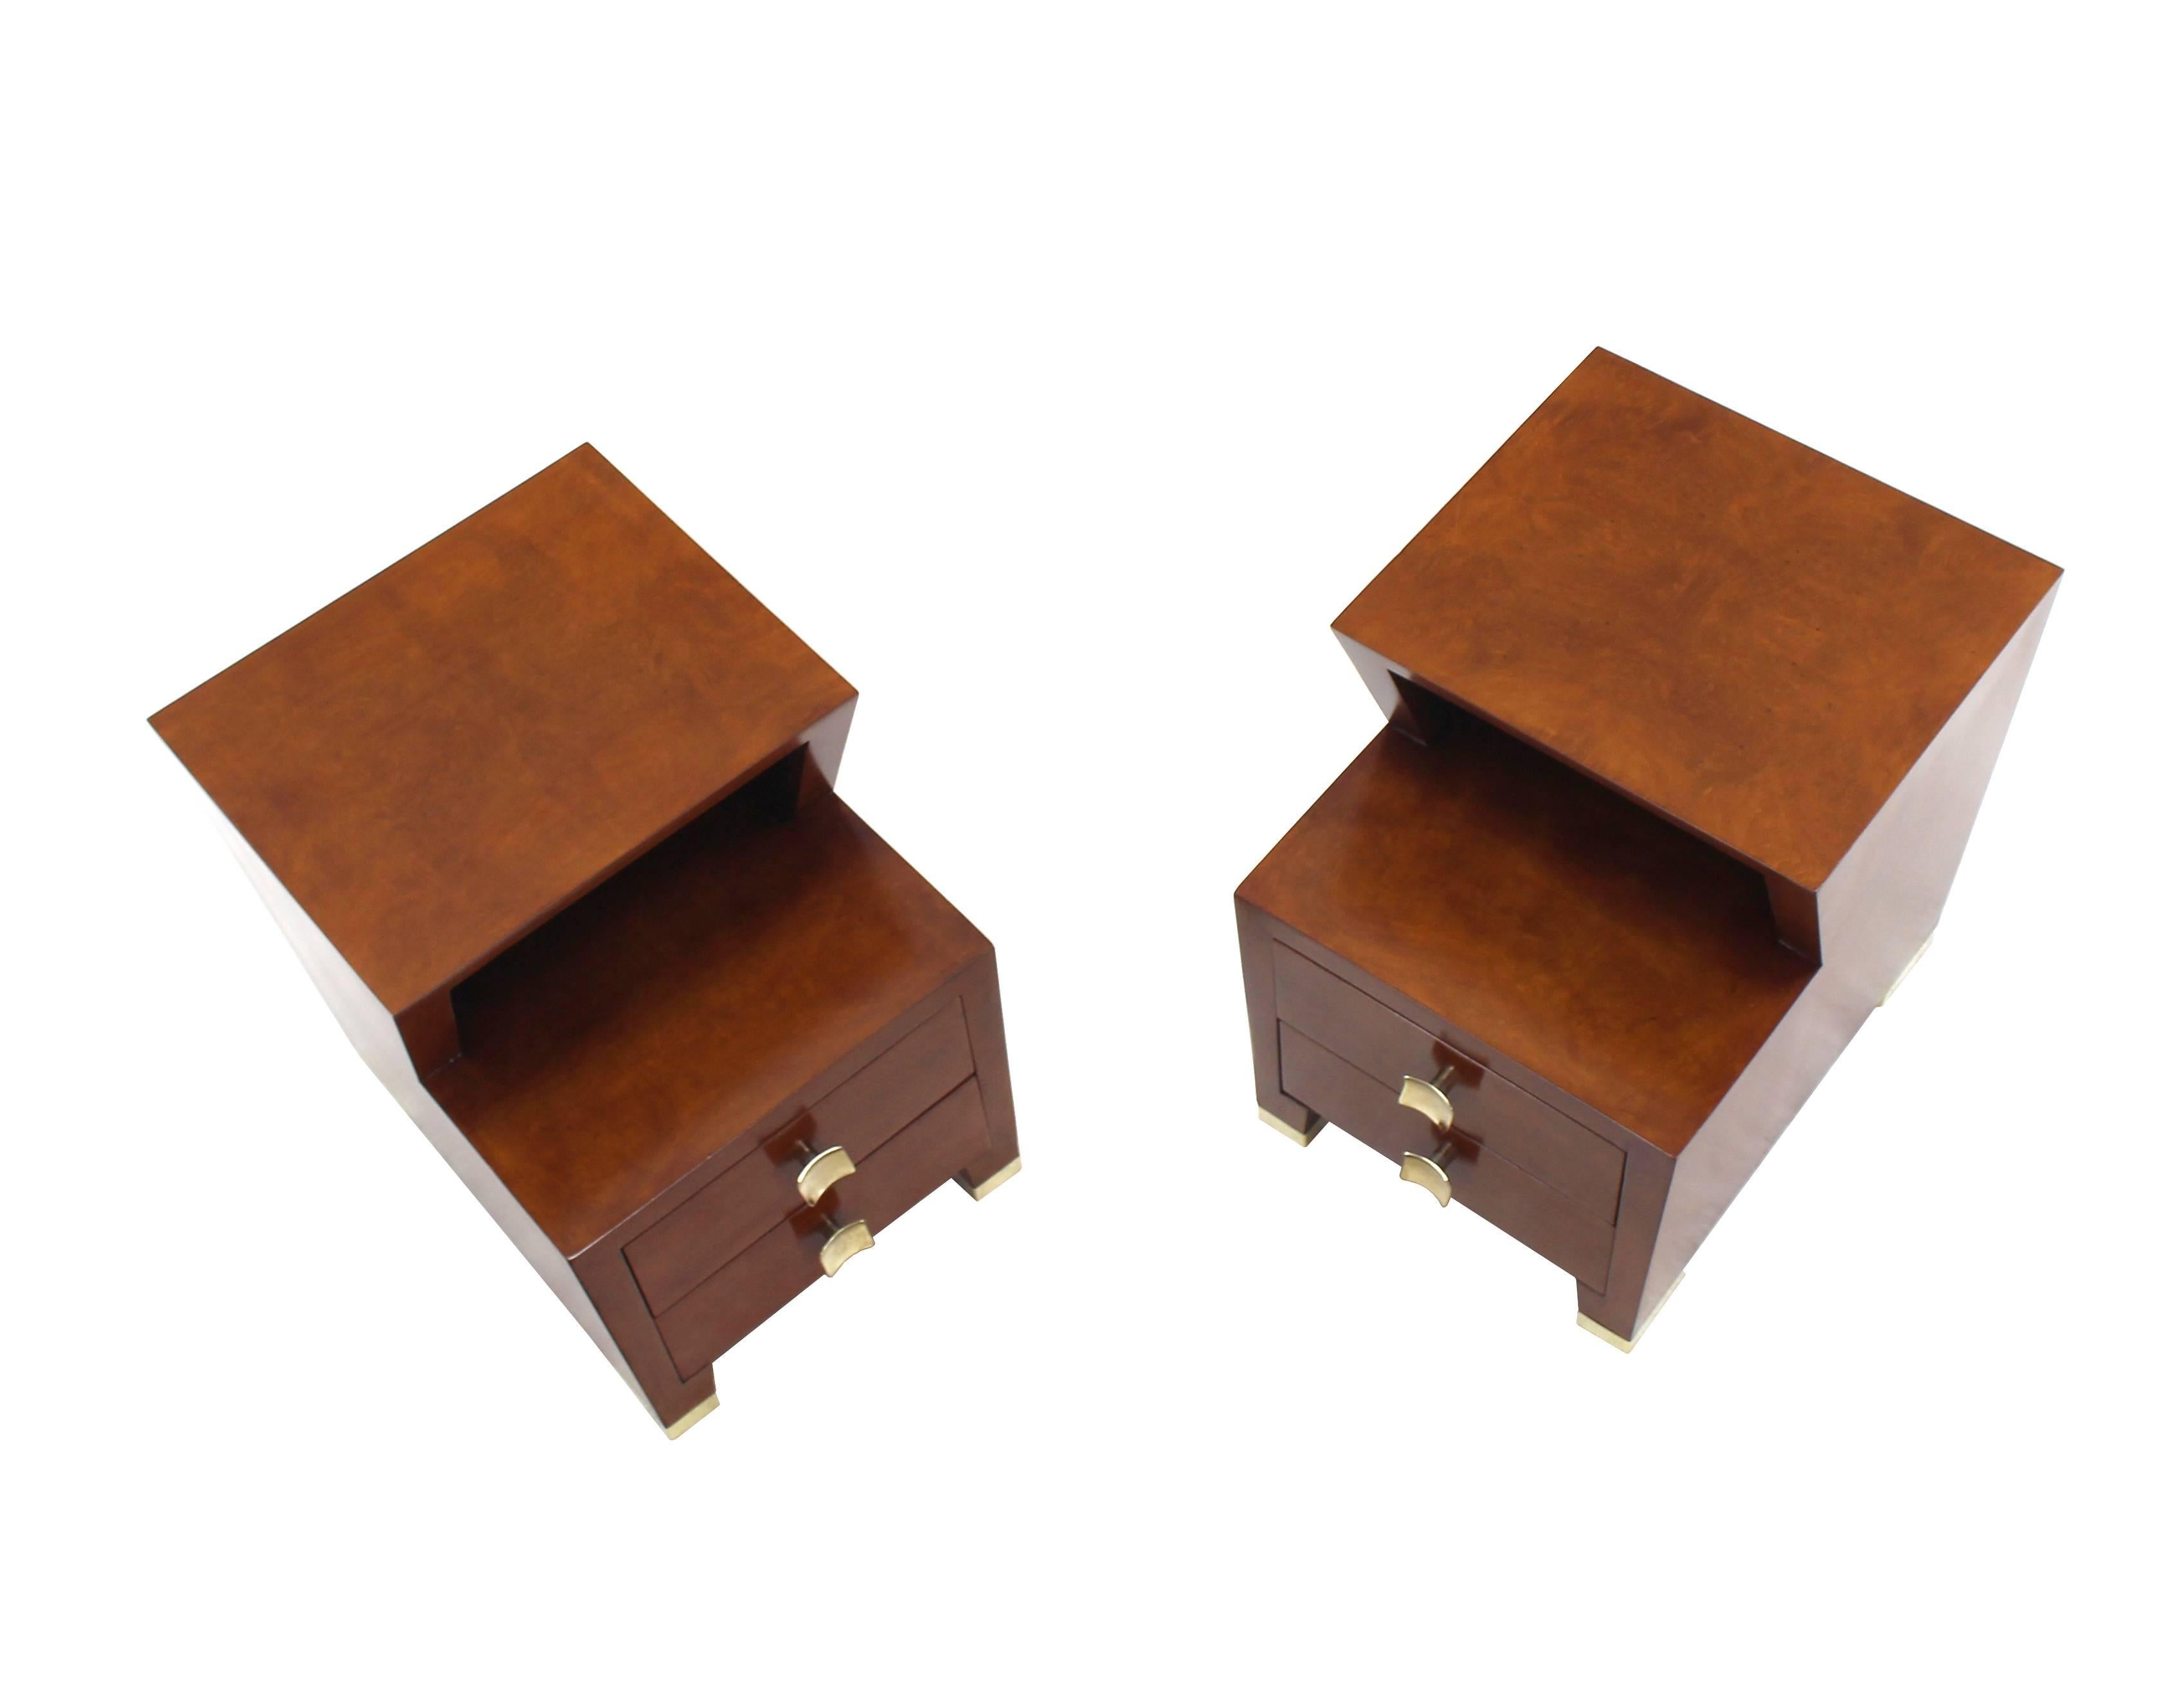 Pair of very nice Mid-Century Modern or Art Deco end tables in burl walnut with brass hardware.